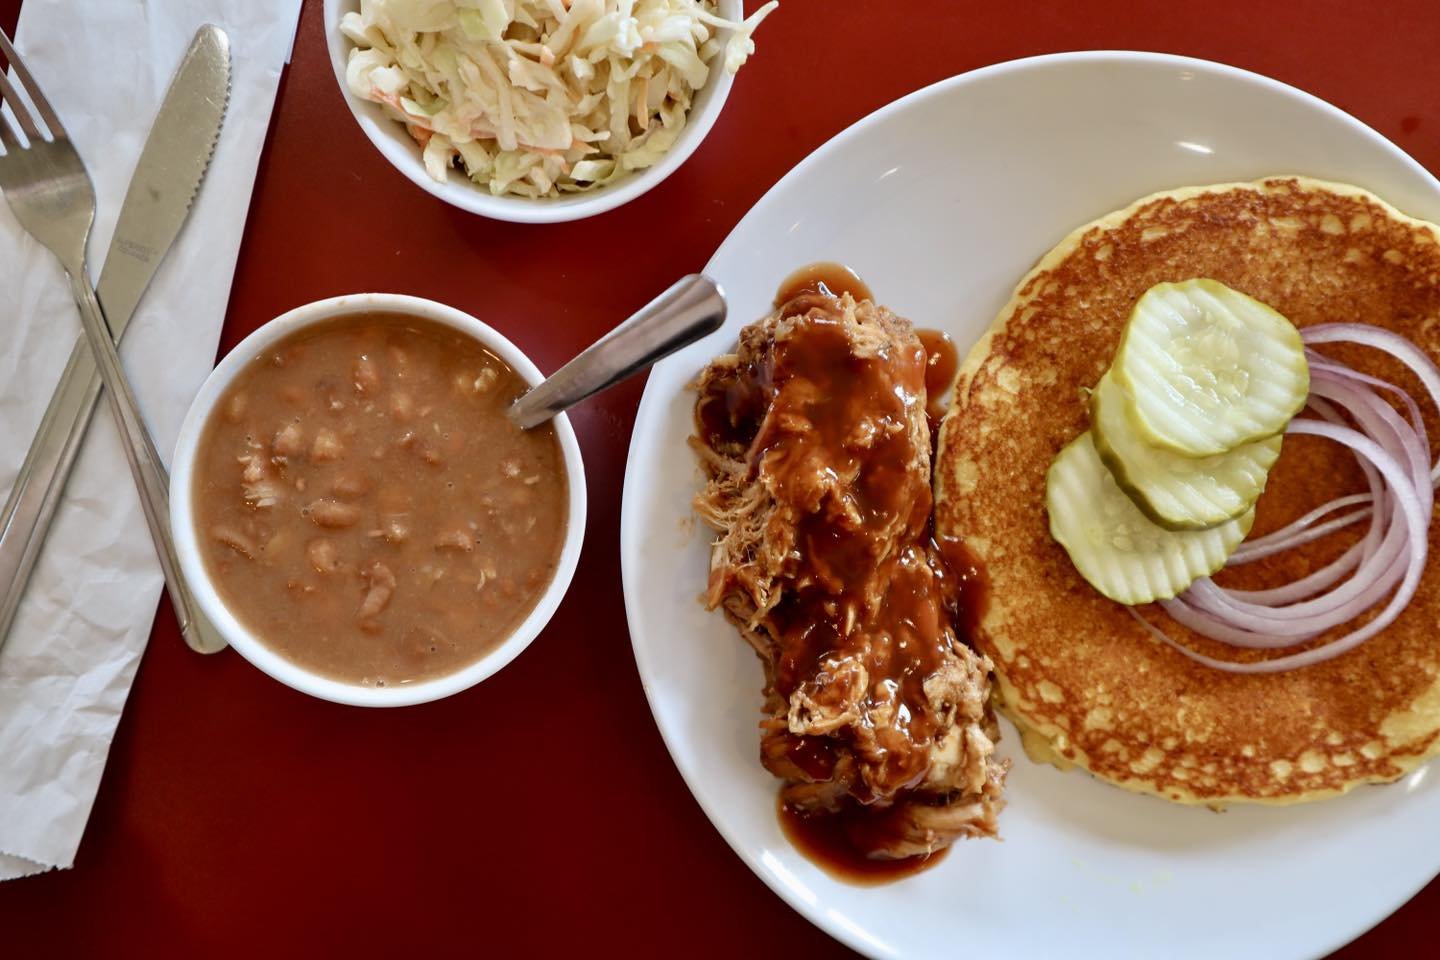 One of our favorite ways to show off Kentucky &mdash; the Stone Cross Farm Pulled Pork Plate.  Smoked and pulled local pork, house made bourbon bbq sauce, hoe cake made with locally grown &amp; ground corn, Whitesburg soup beans &amp; a creamy slaw!
